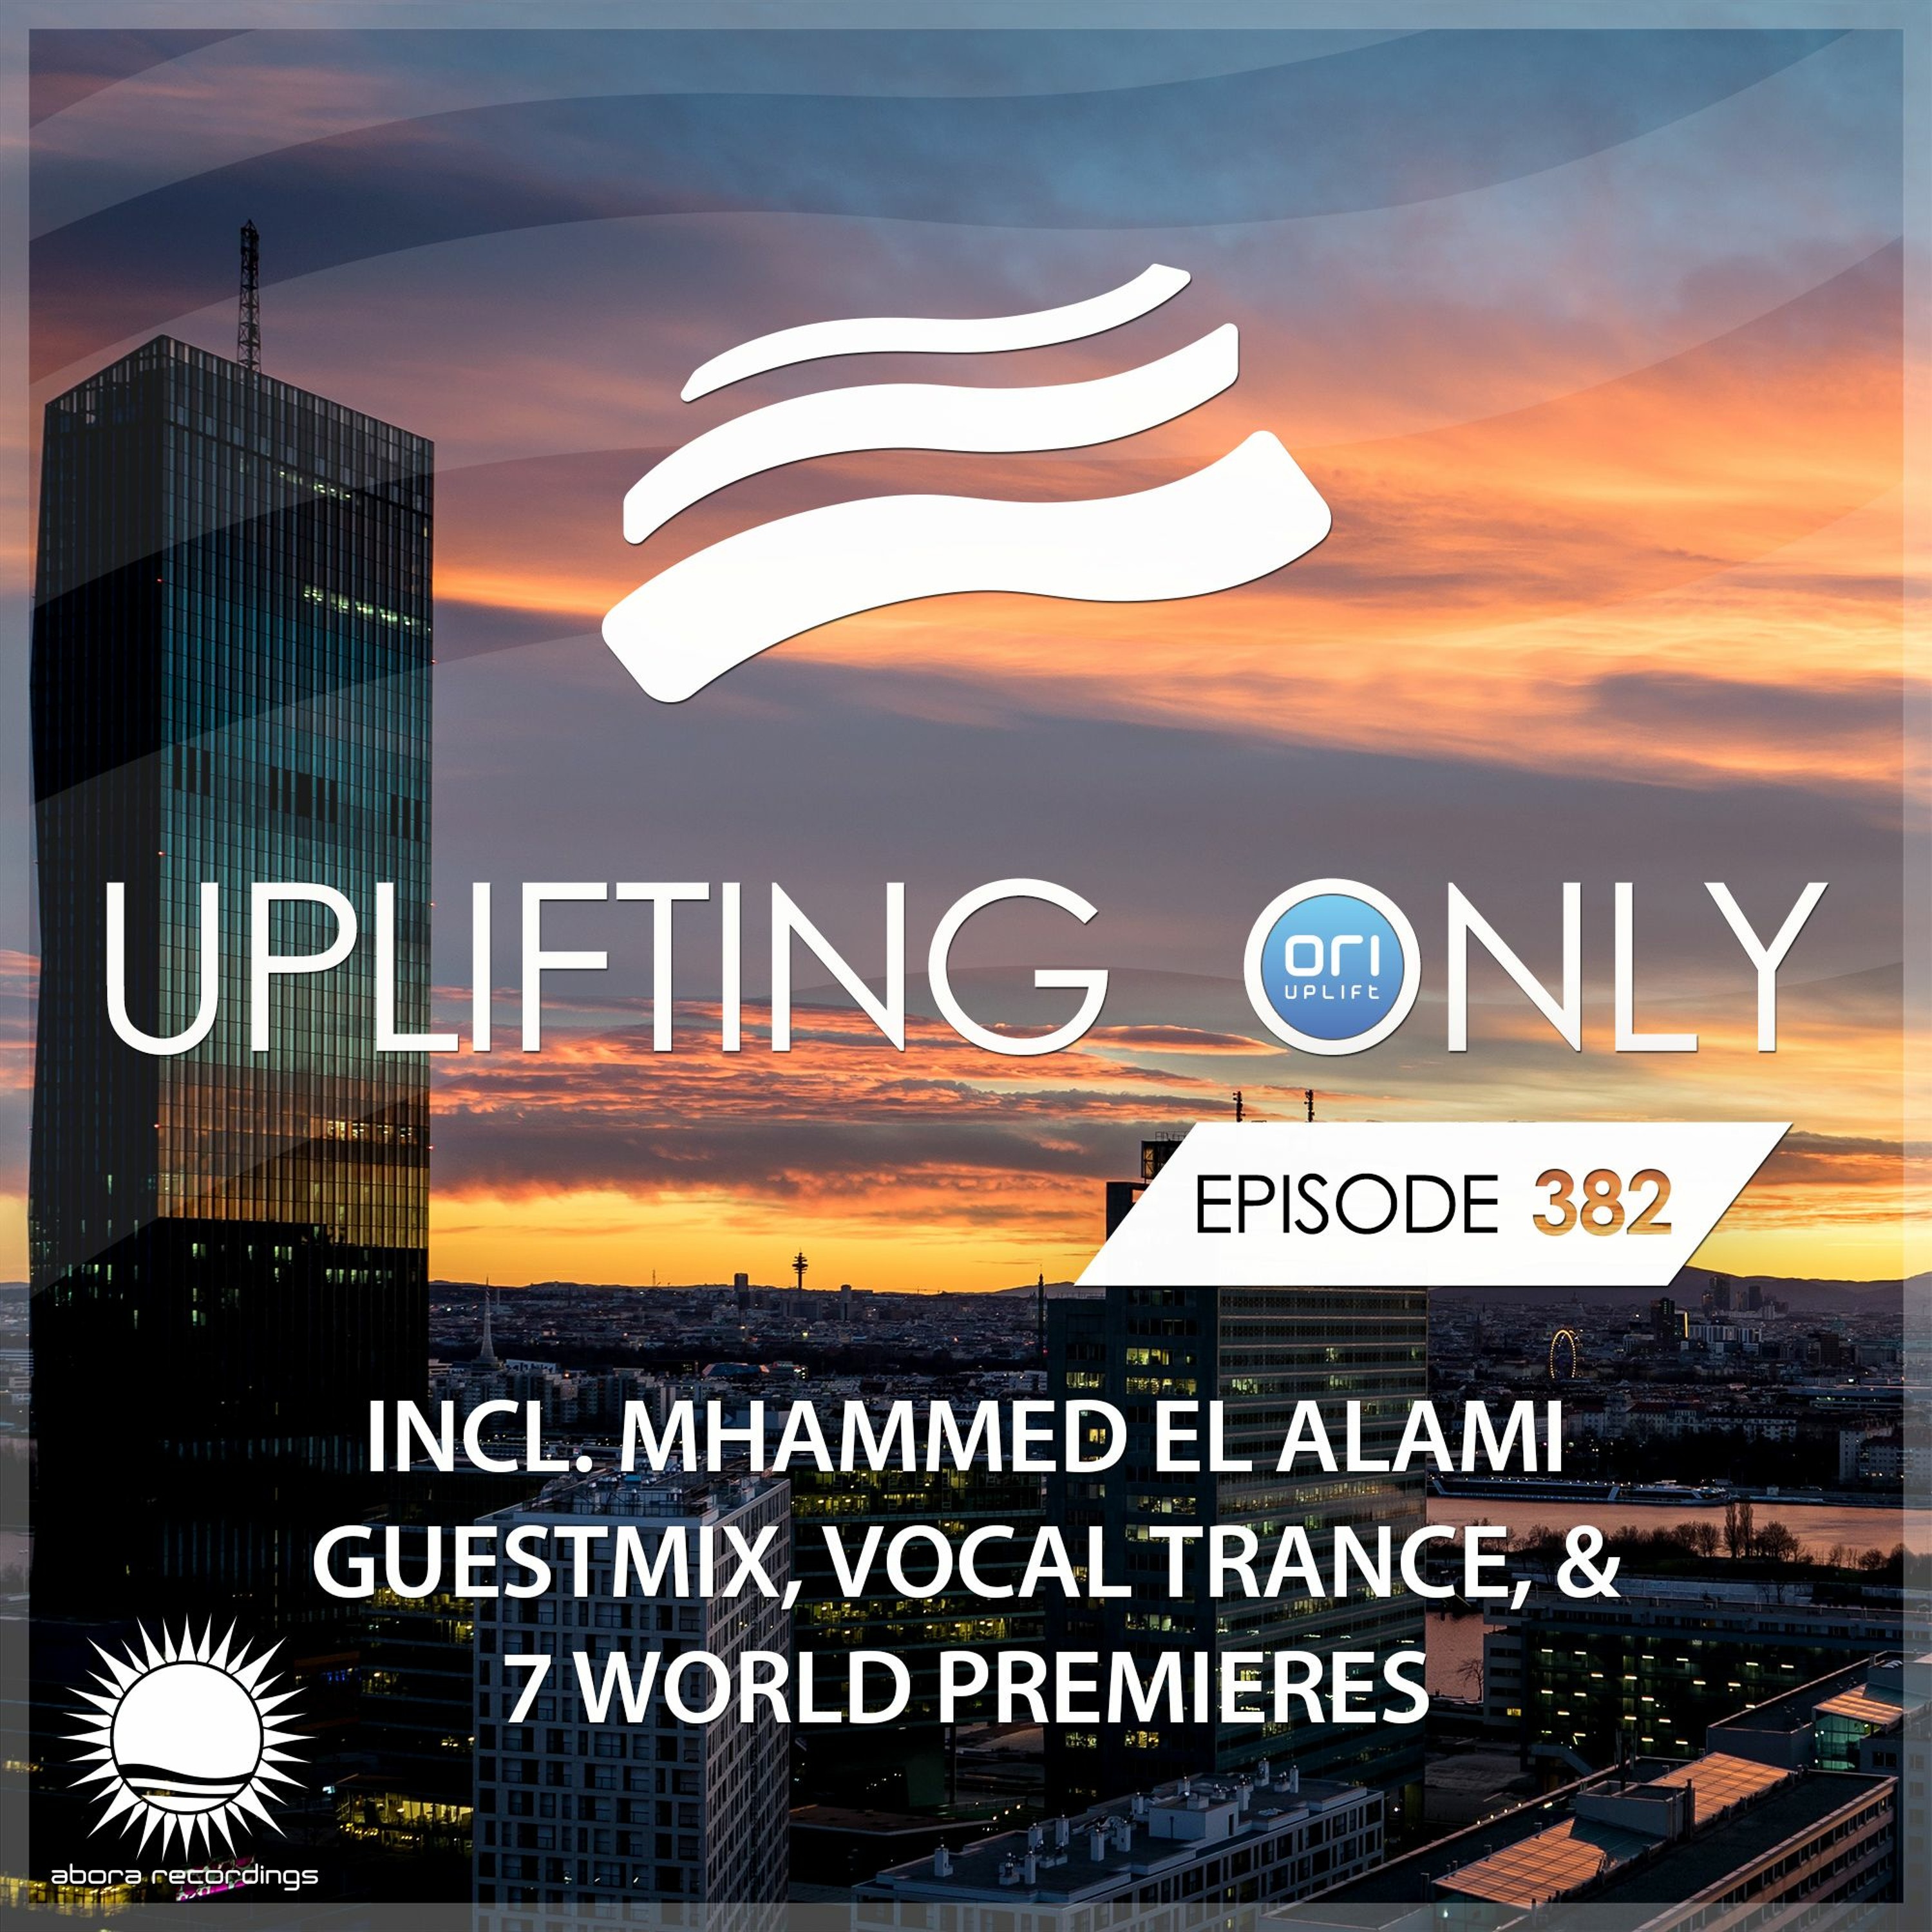 Uplifting Only 382 (June 4, 2020) (incl. Mhammed El Alami Guestmix) [incl. Vocal Trance]